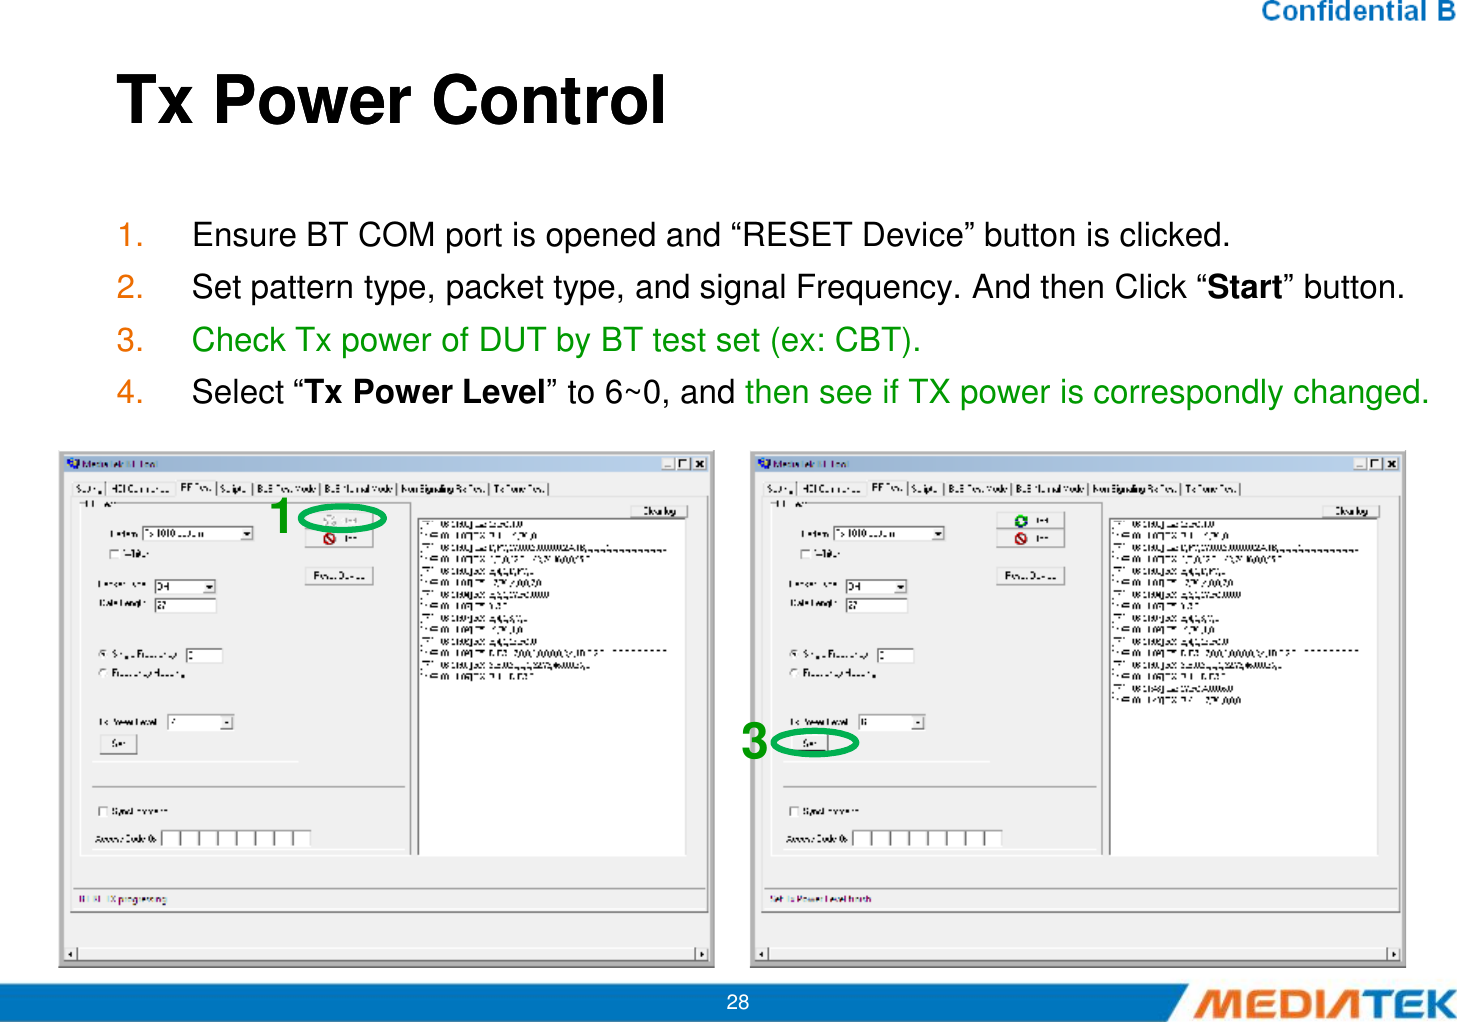 Tx Power ControlTx Power Control1. Ensure BT COM port is opened and “RESET Device” button is clicked.2. Set pattern type, packet type, and signal Frequency. And then Click “Start” button.3. Check Tx power of DUT by BT test set (ex: CBT).4. Select “Tx Power Level” to 6~0, and then see if TX power is correspondly changed.12813